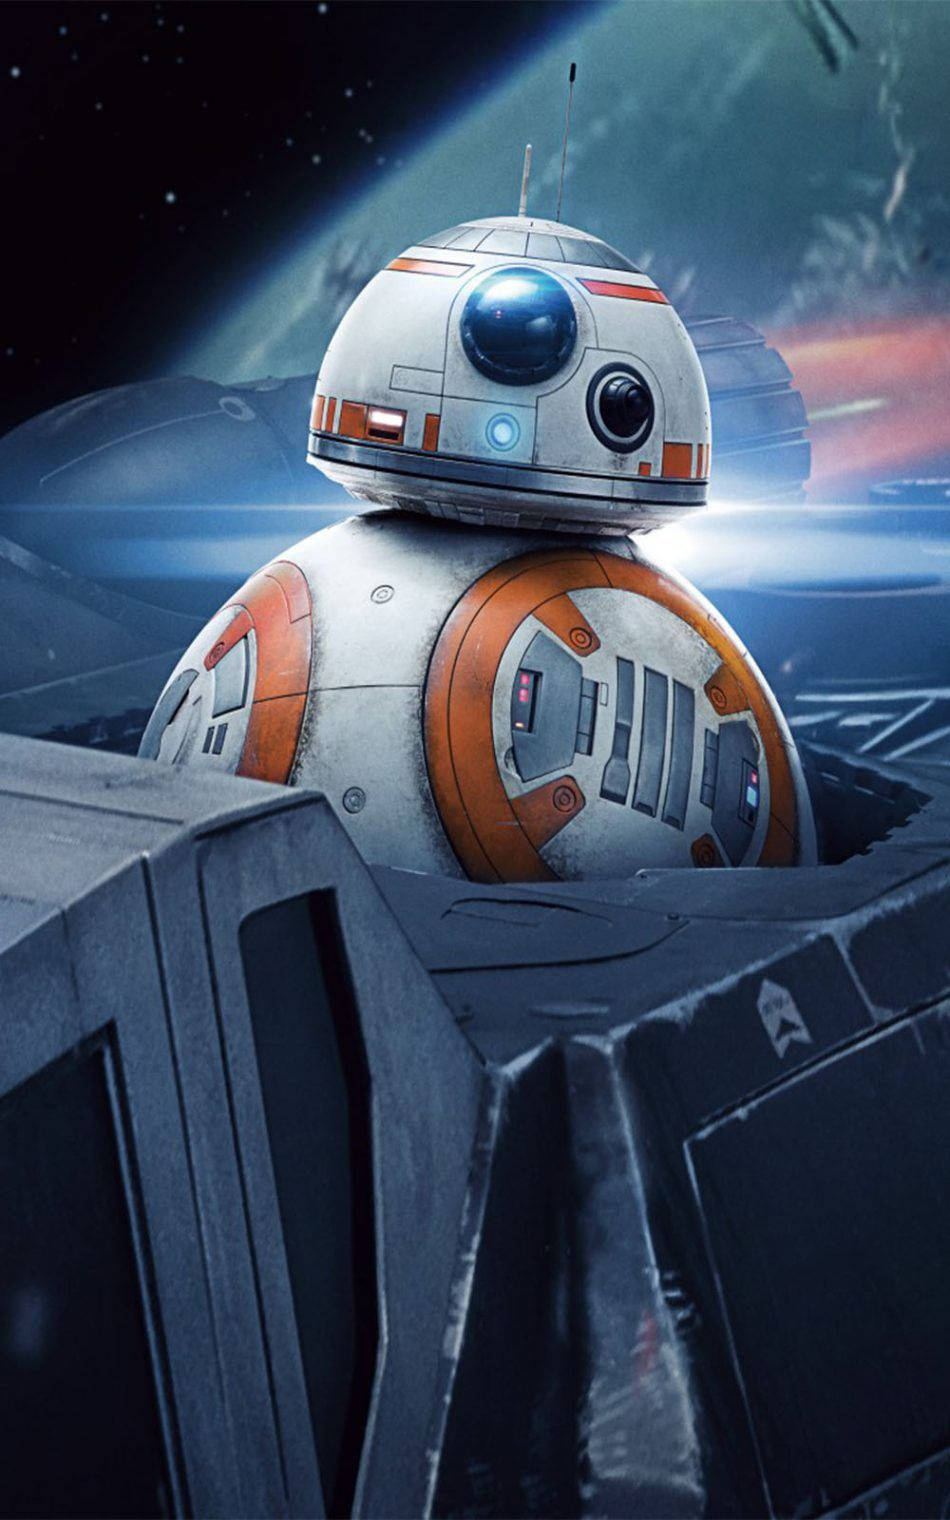 Robot In Star Wars Cell Phone Wallpaper